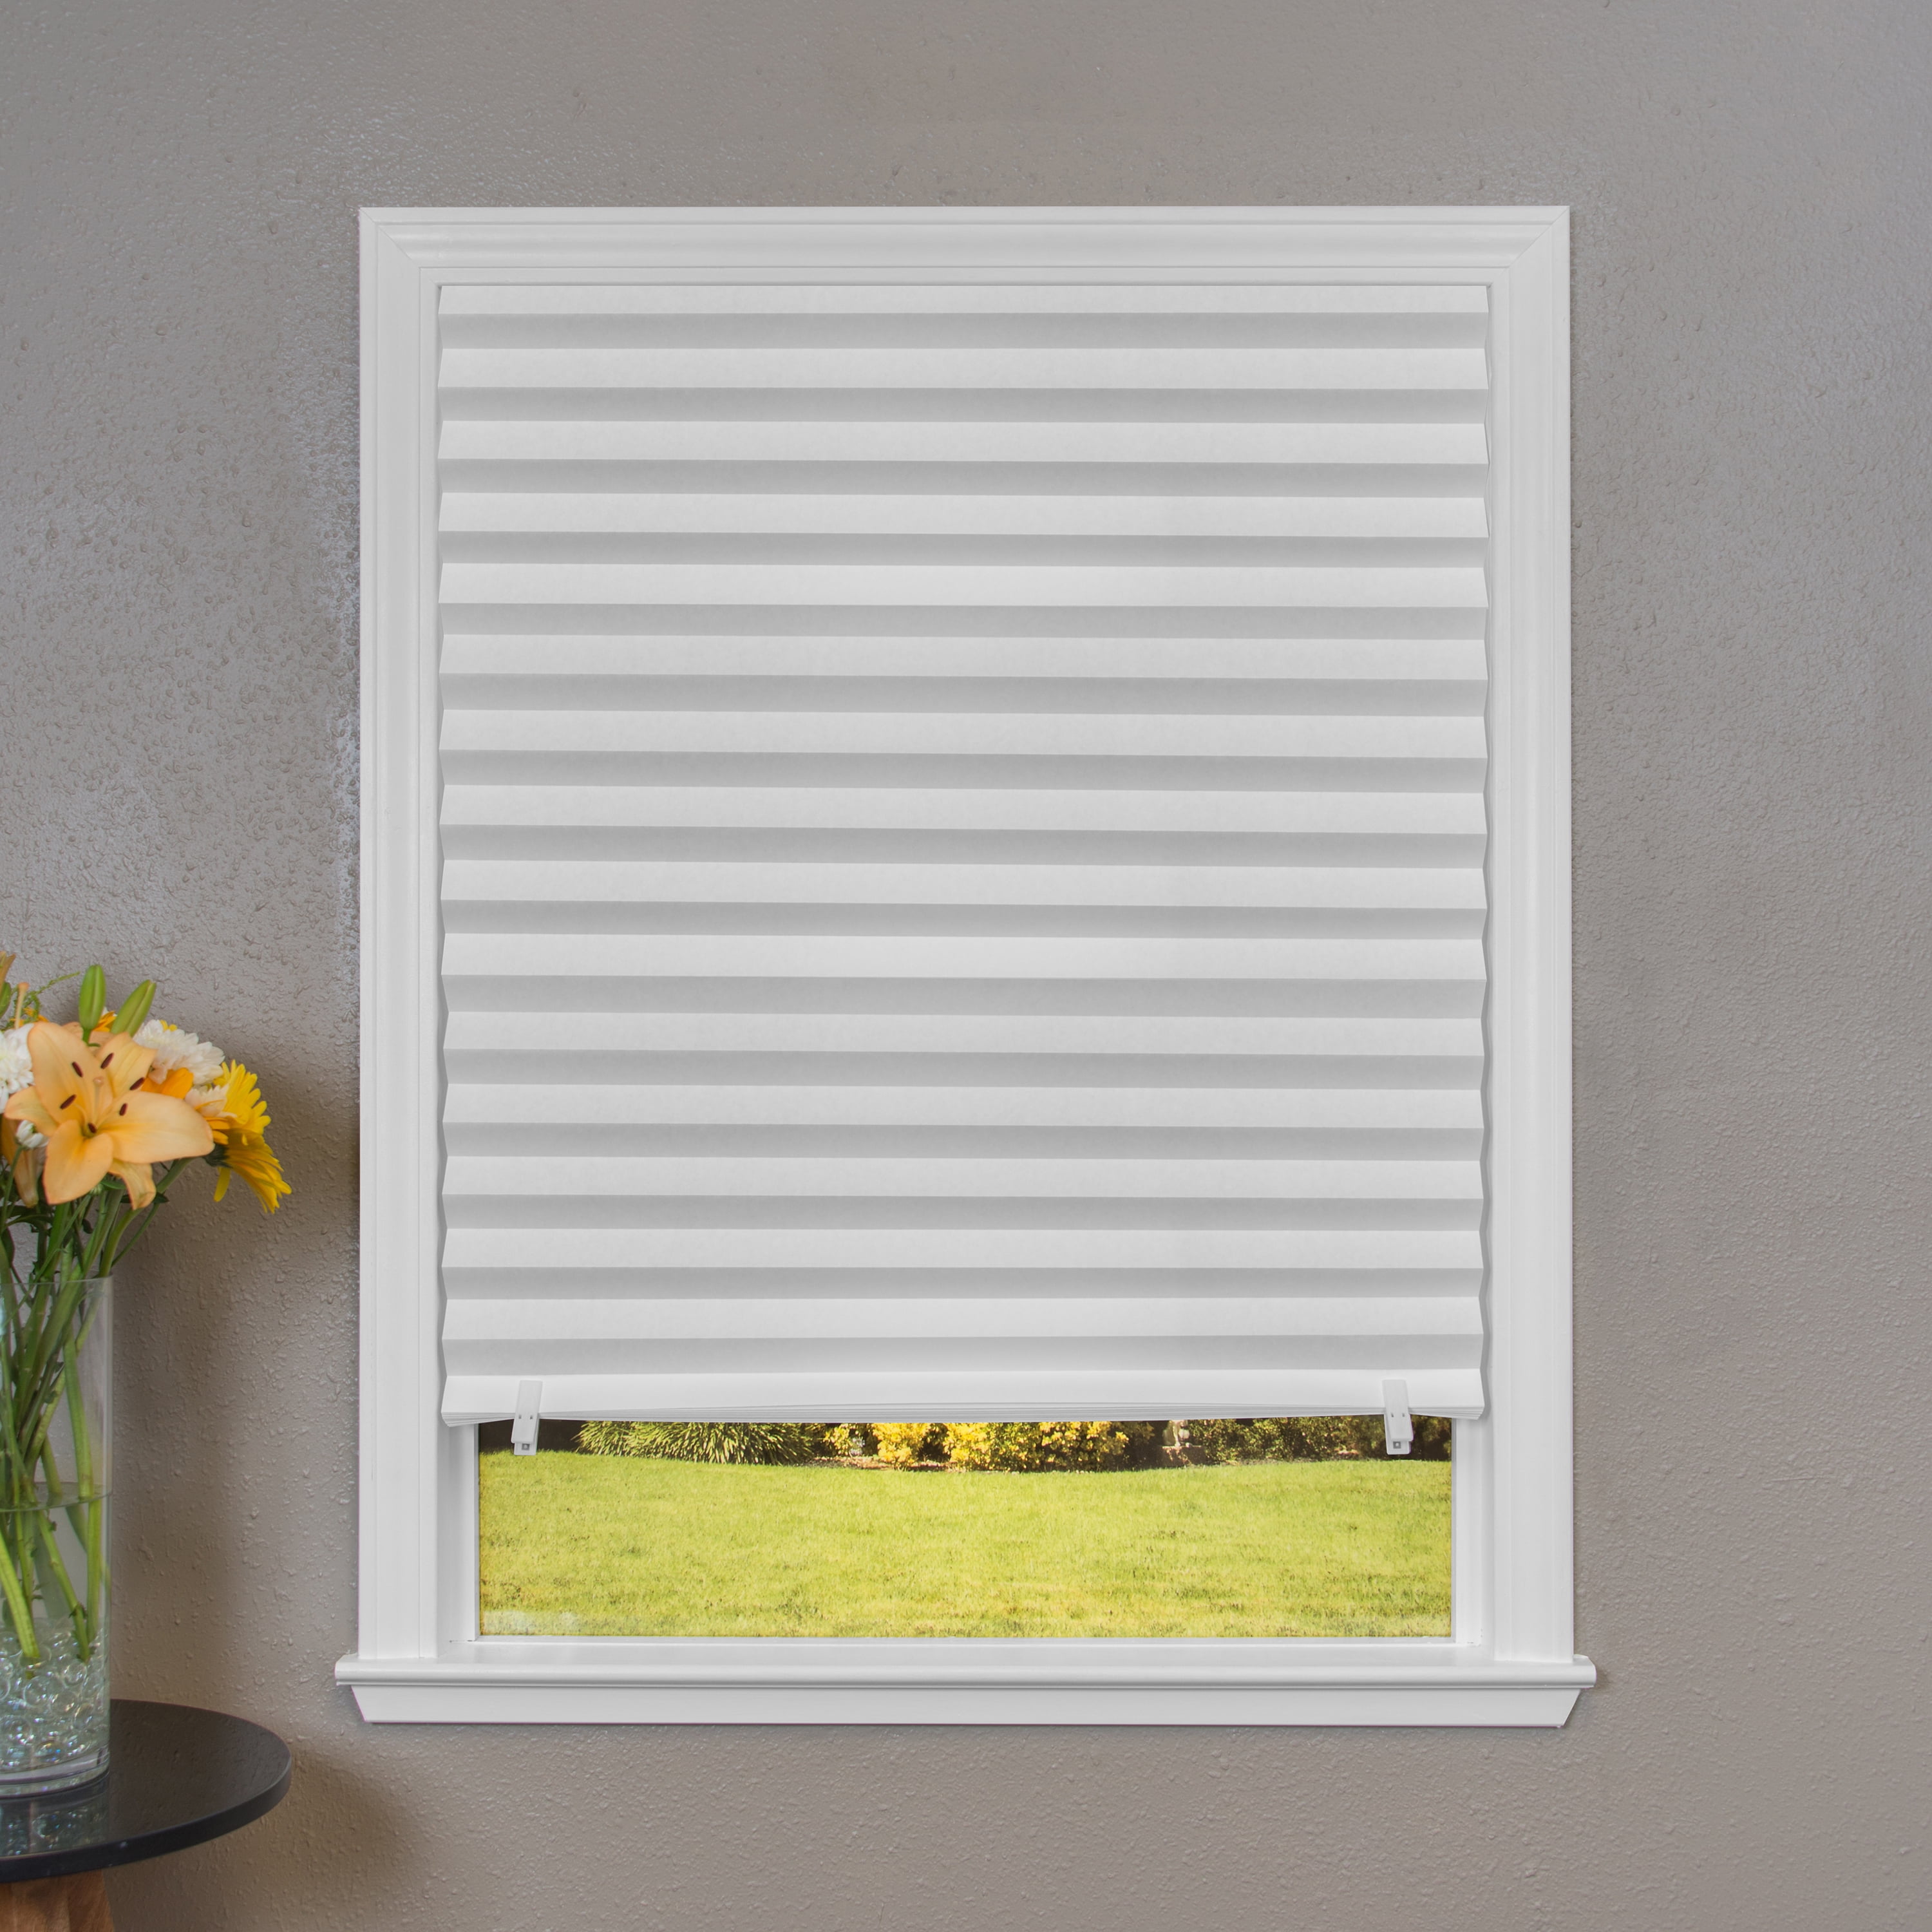 Light Filtering Pleated Paper Shades White 36"" x 69" Pack of 6 Temporary Shades 